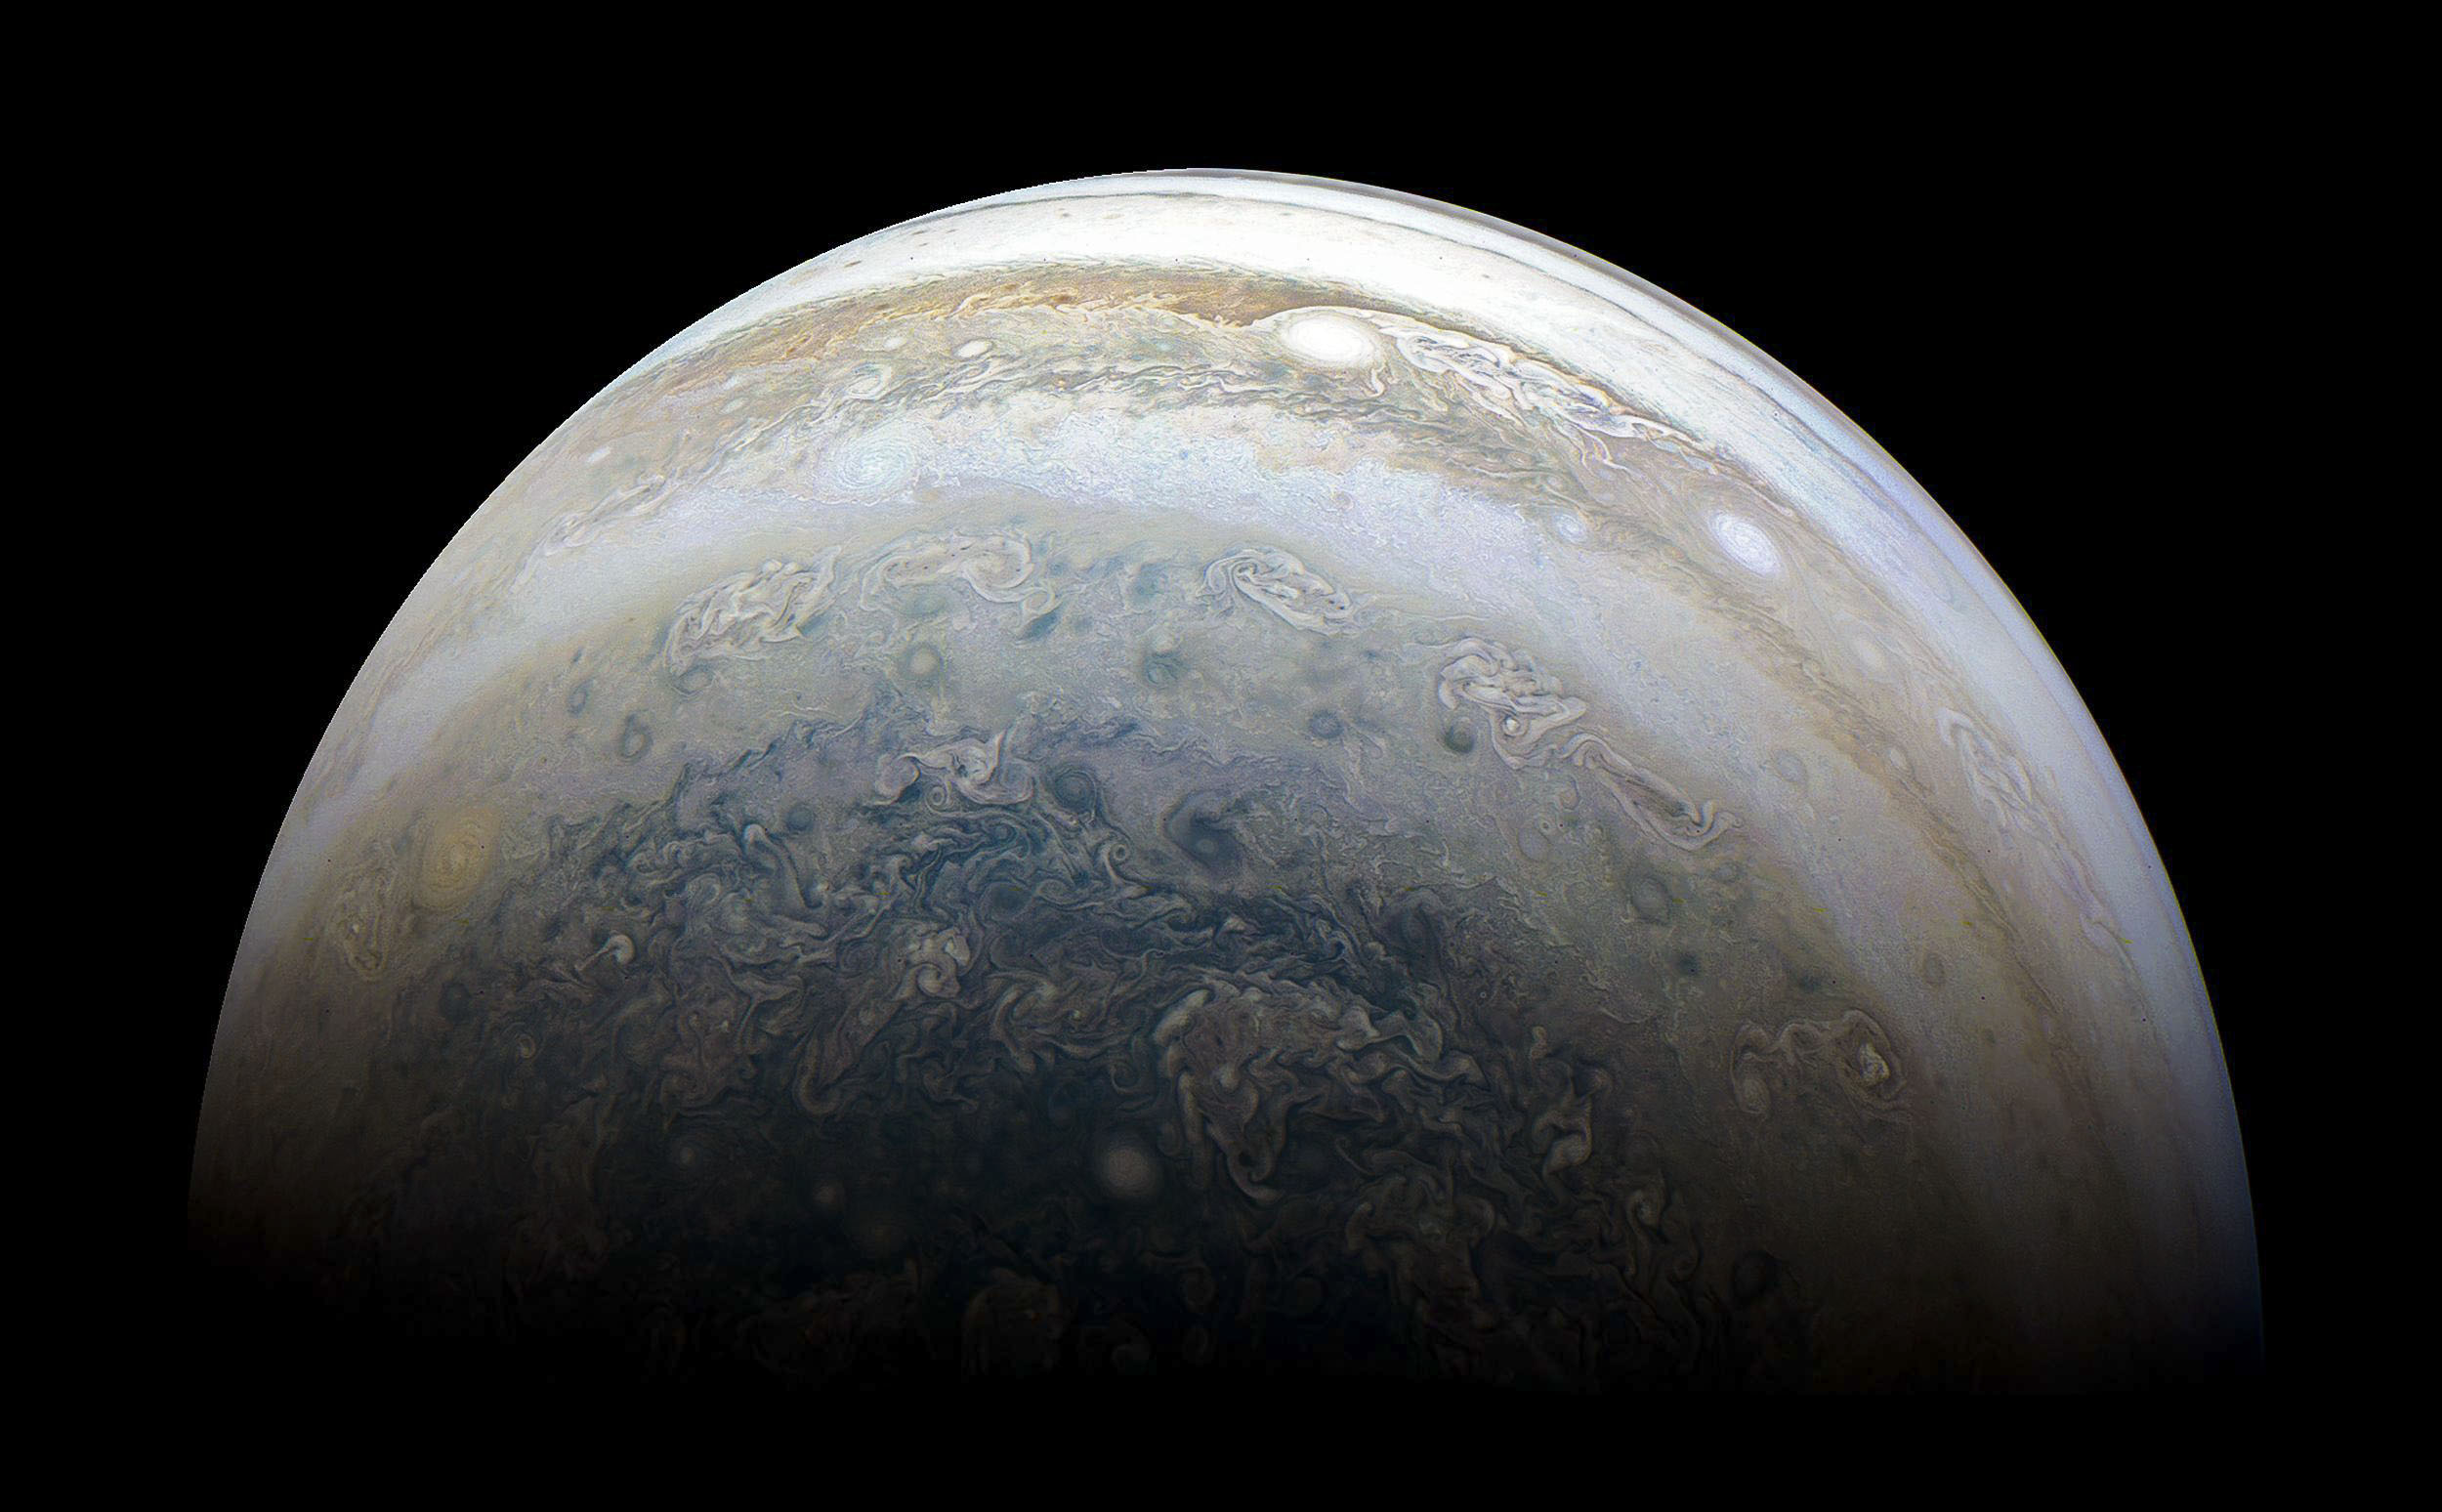 PHOTO: Jupiter's southern hemisphere is pictured by NASA's Juno spacecraft on the outbound leg of a close flyby of the gas-giant planet in an image released on July 2, 2018.